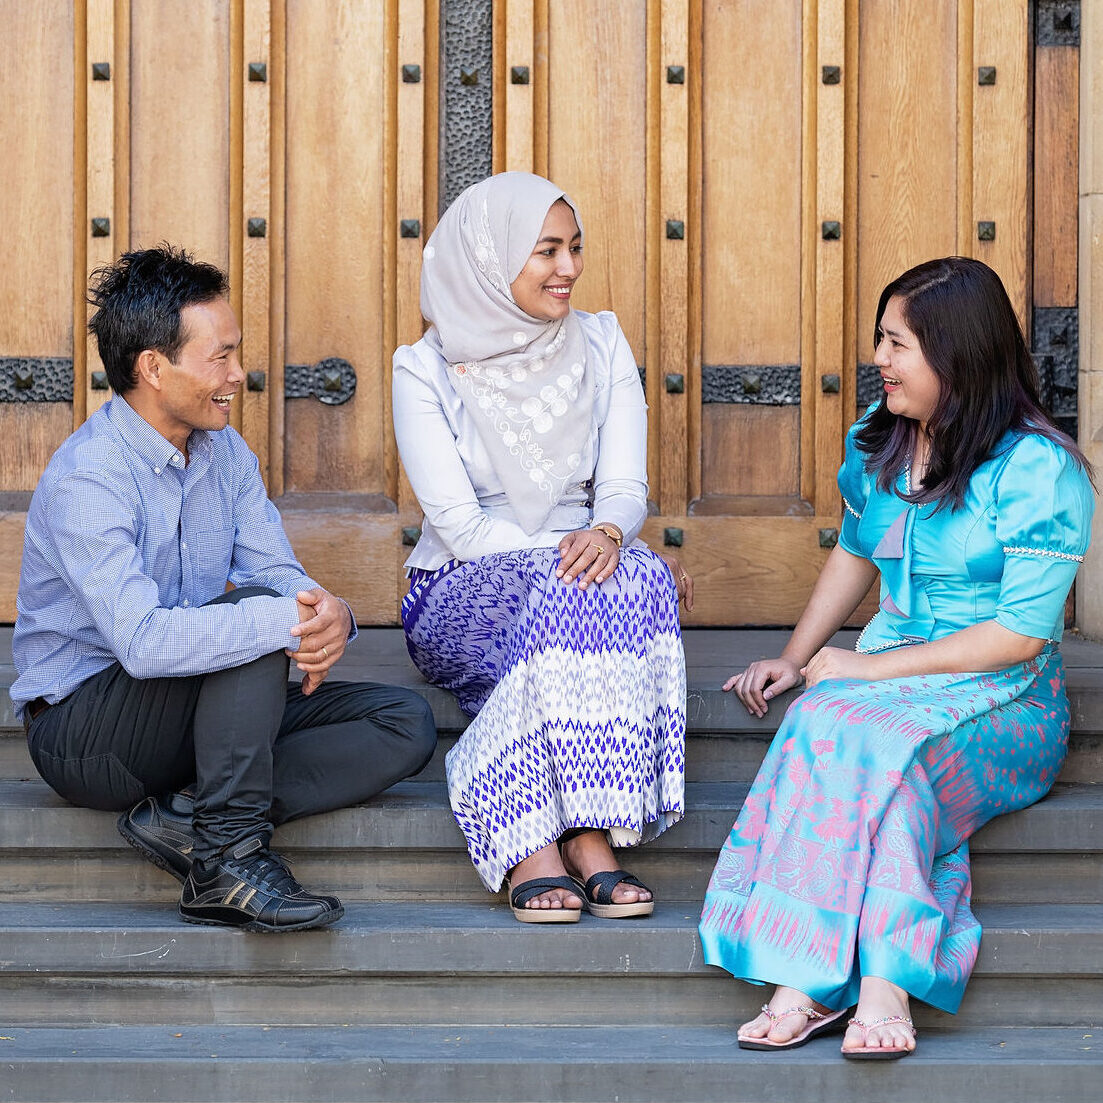 Three people sitting on steps and having a chat